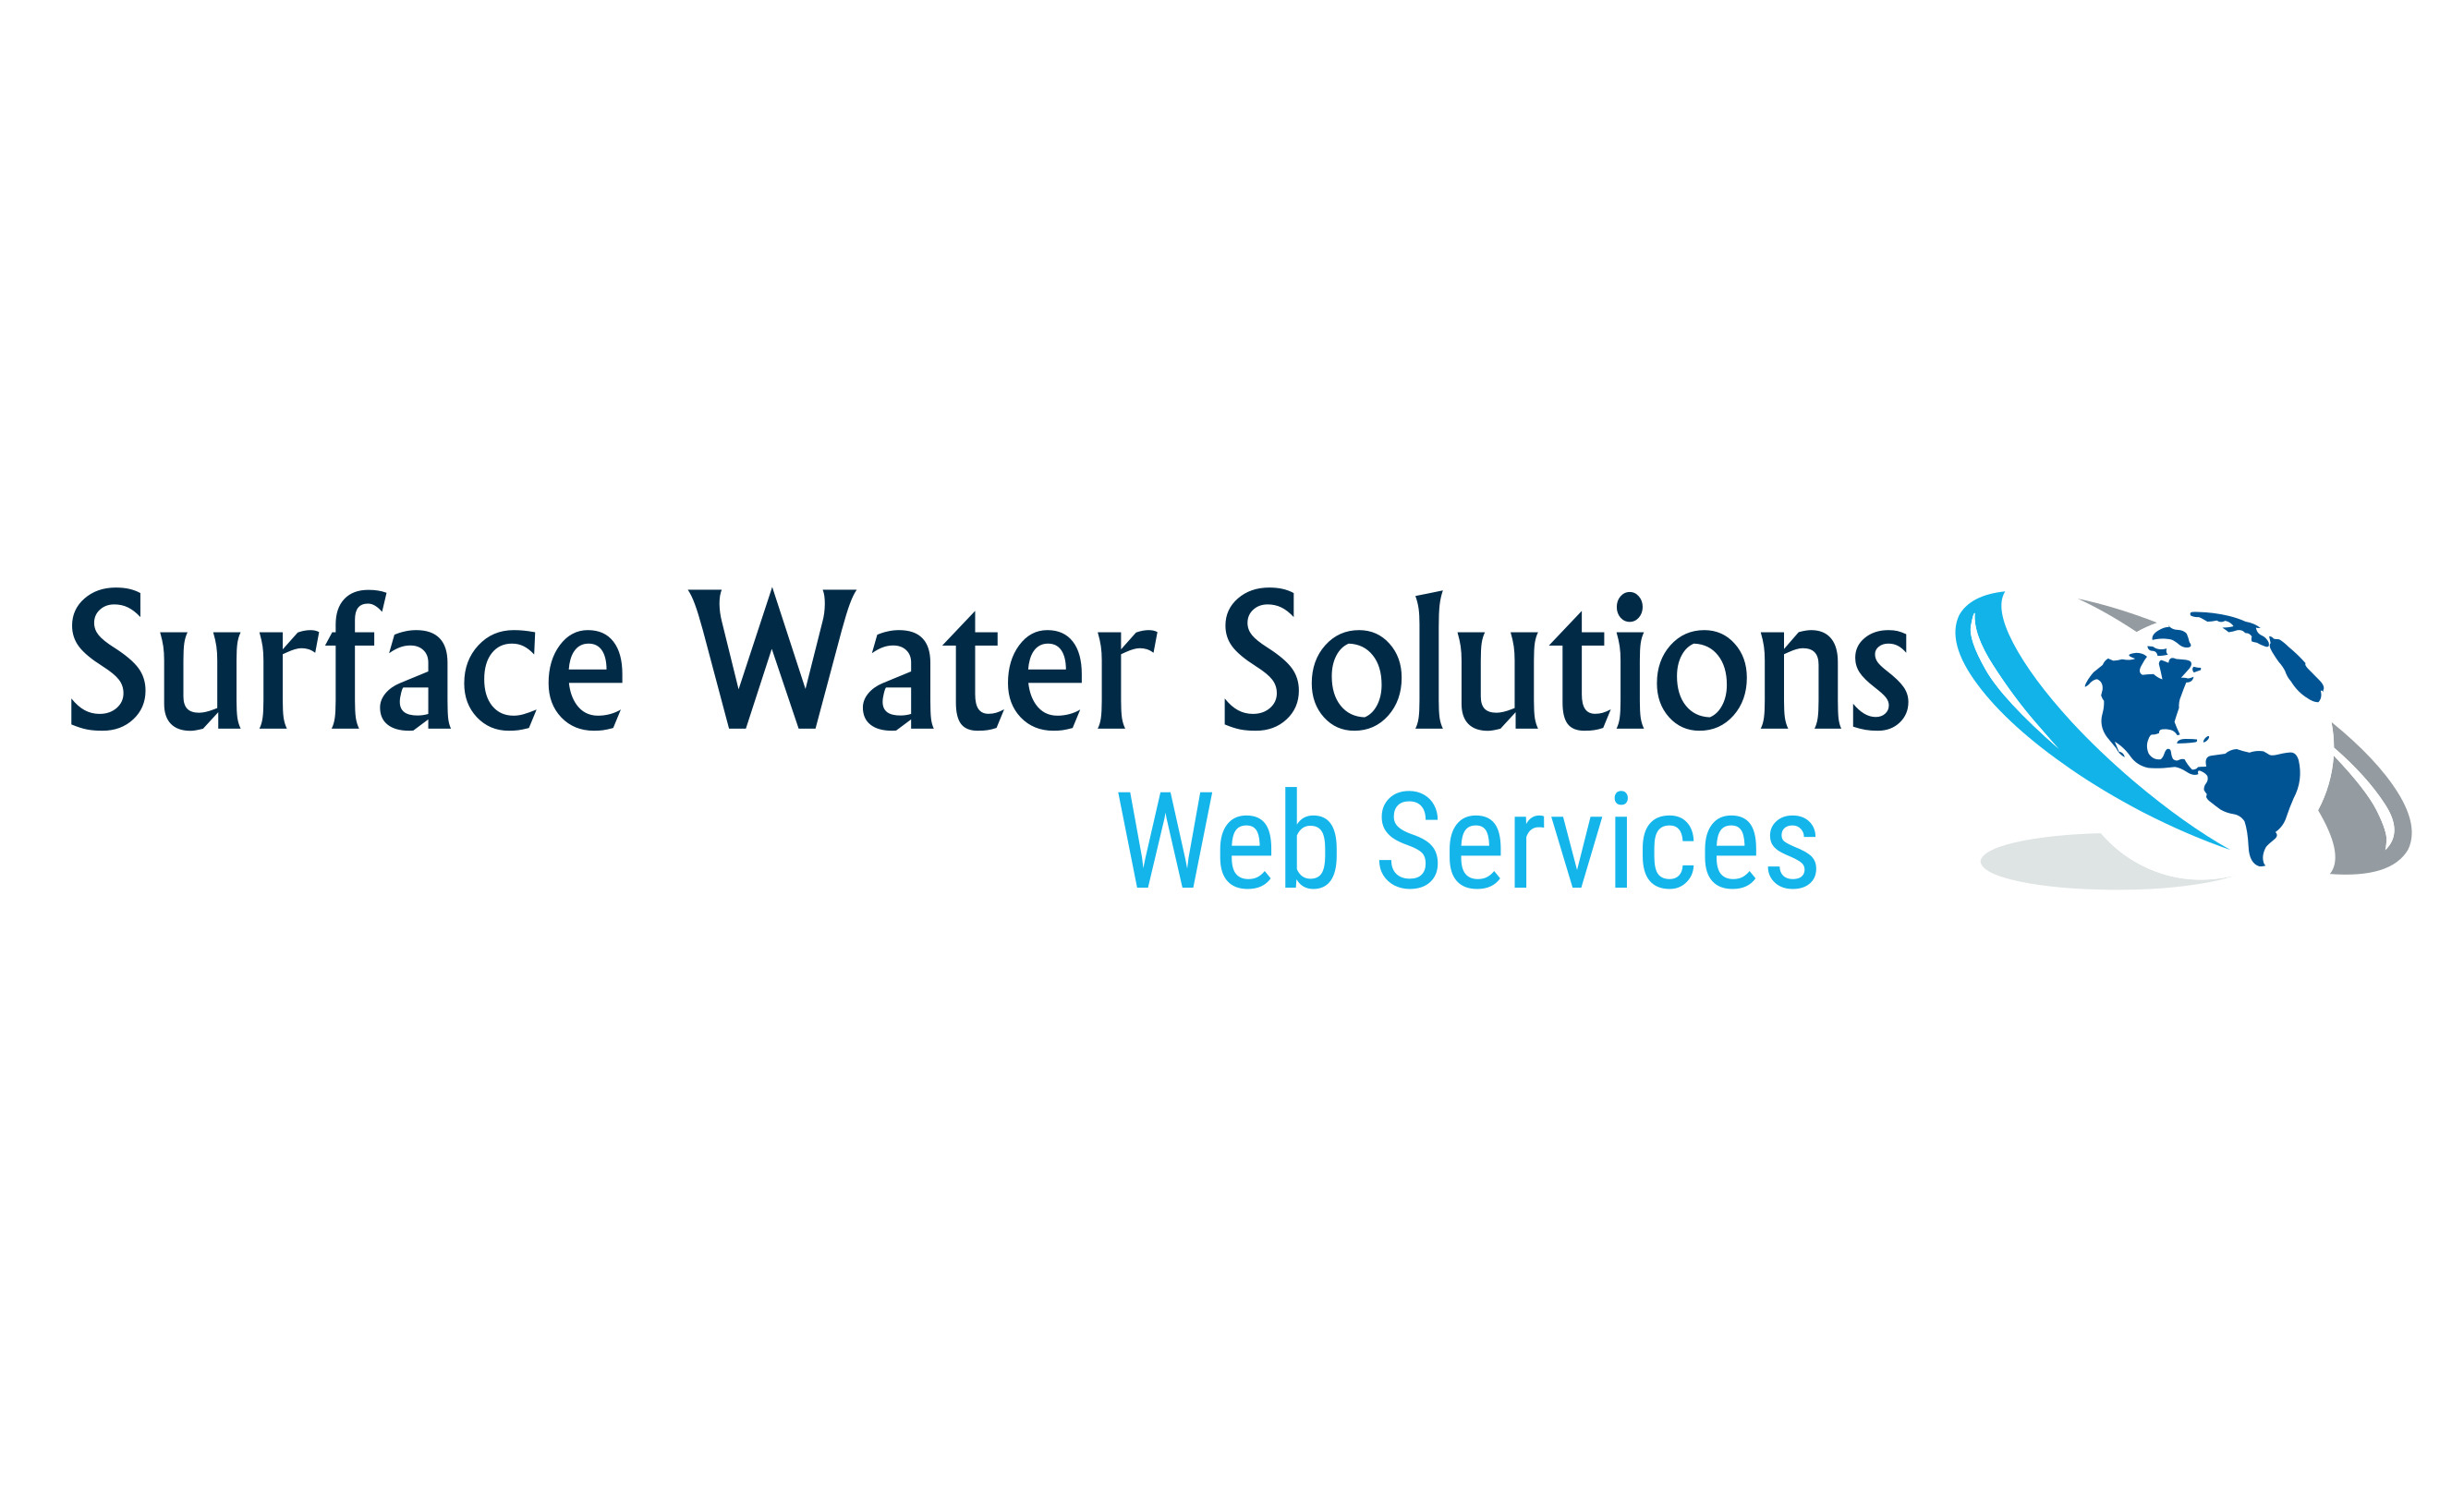 Surface Water Solutions Web Services